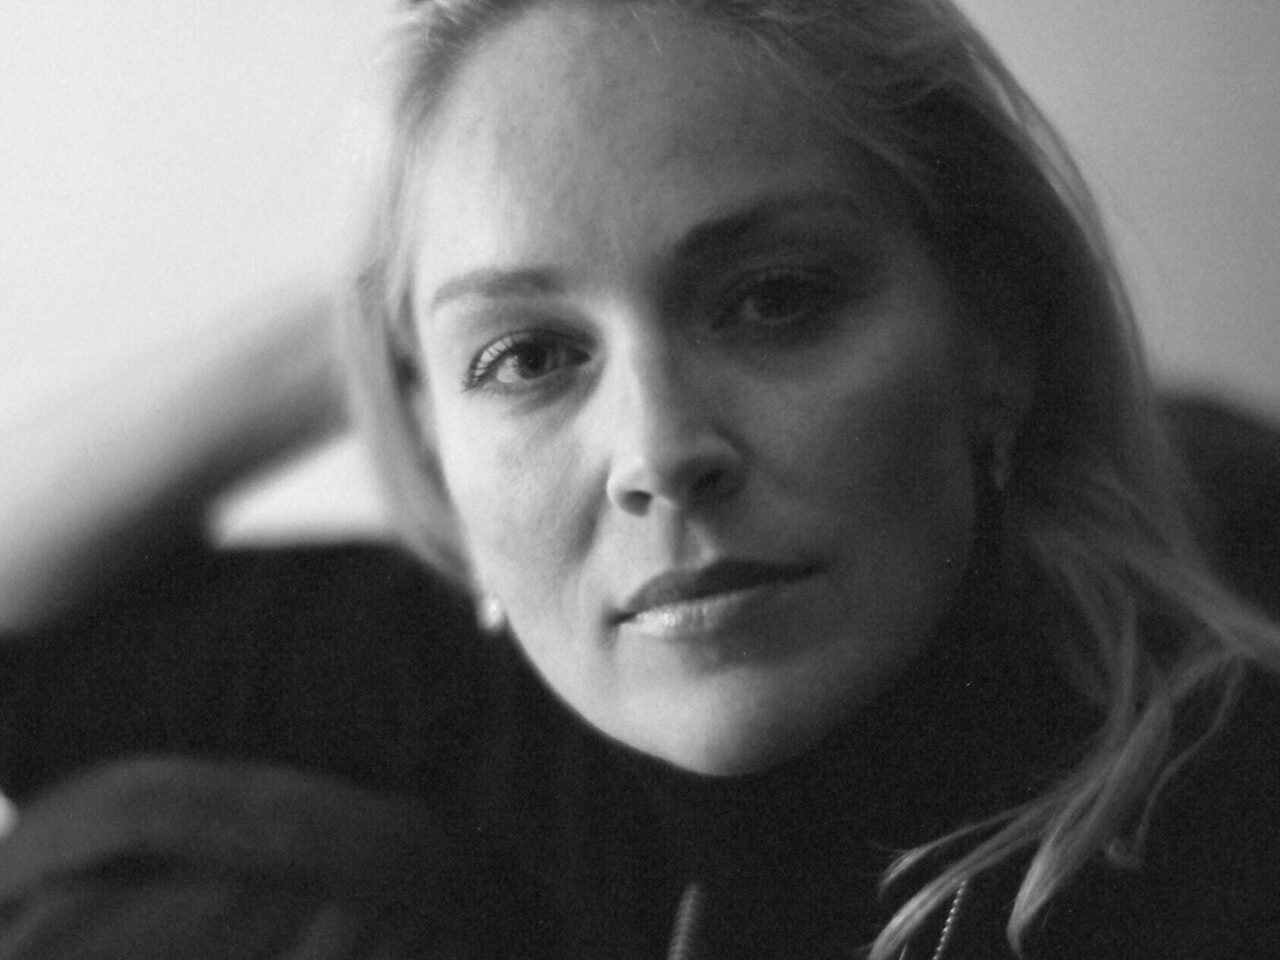 Sharon Stone Gets Real About Living With a Disability and Medical Gaslighting